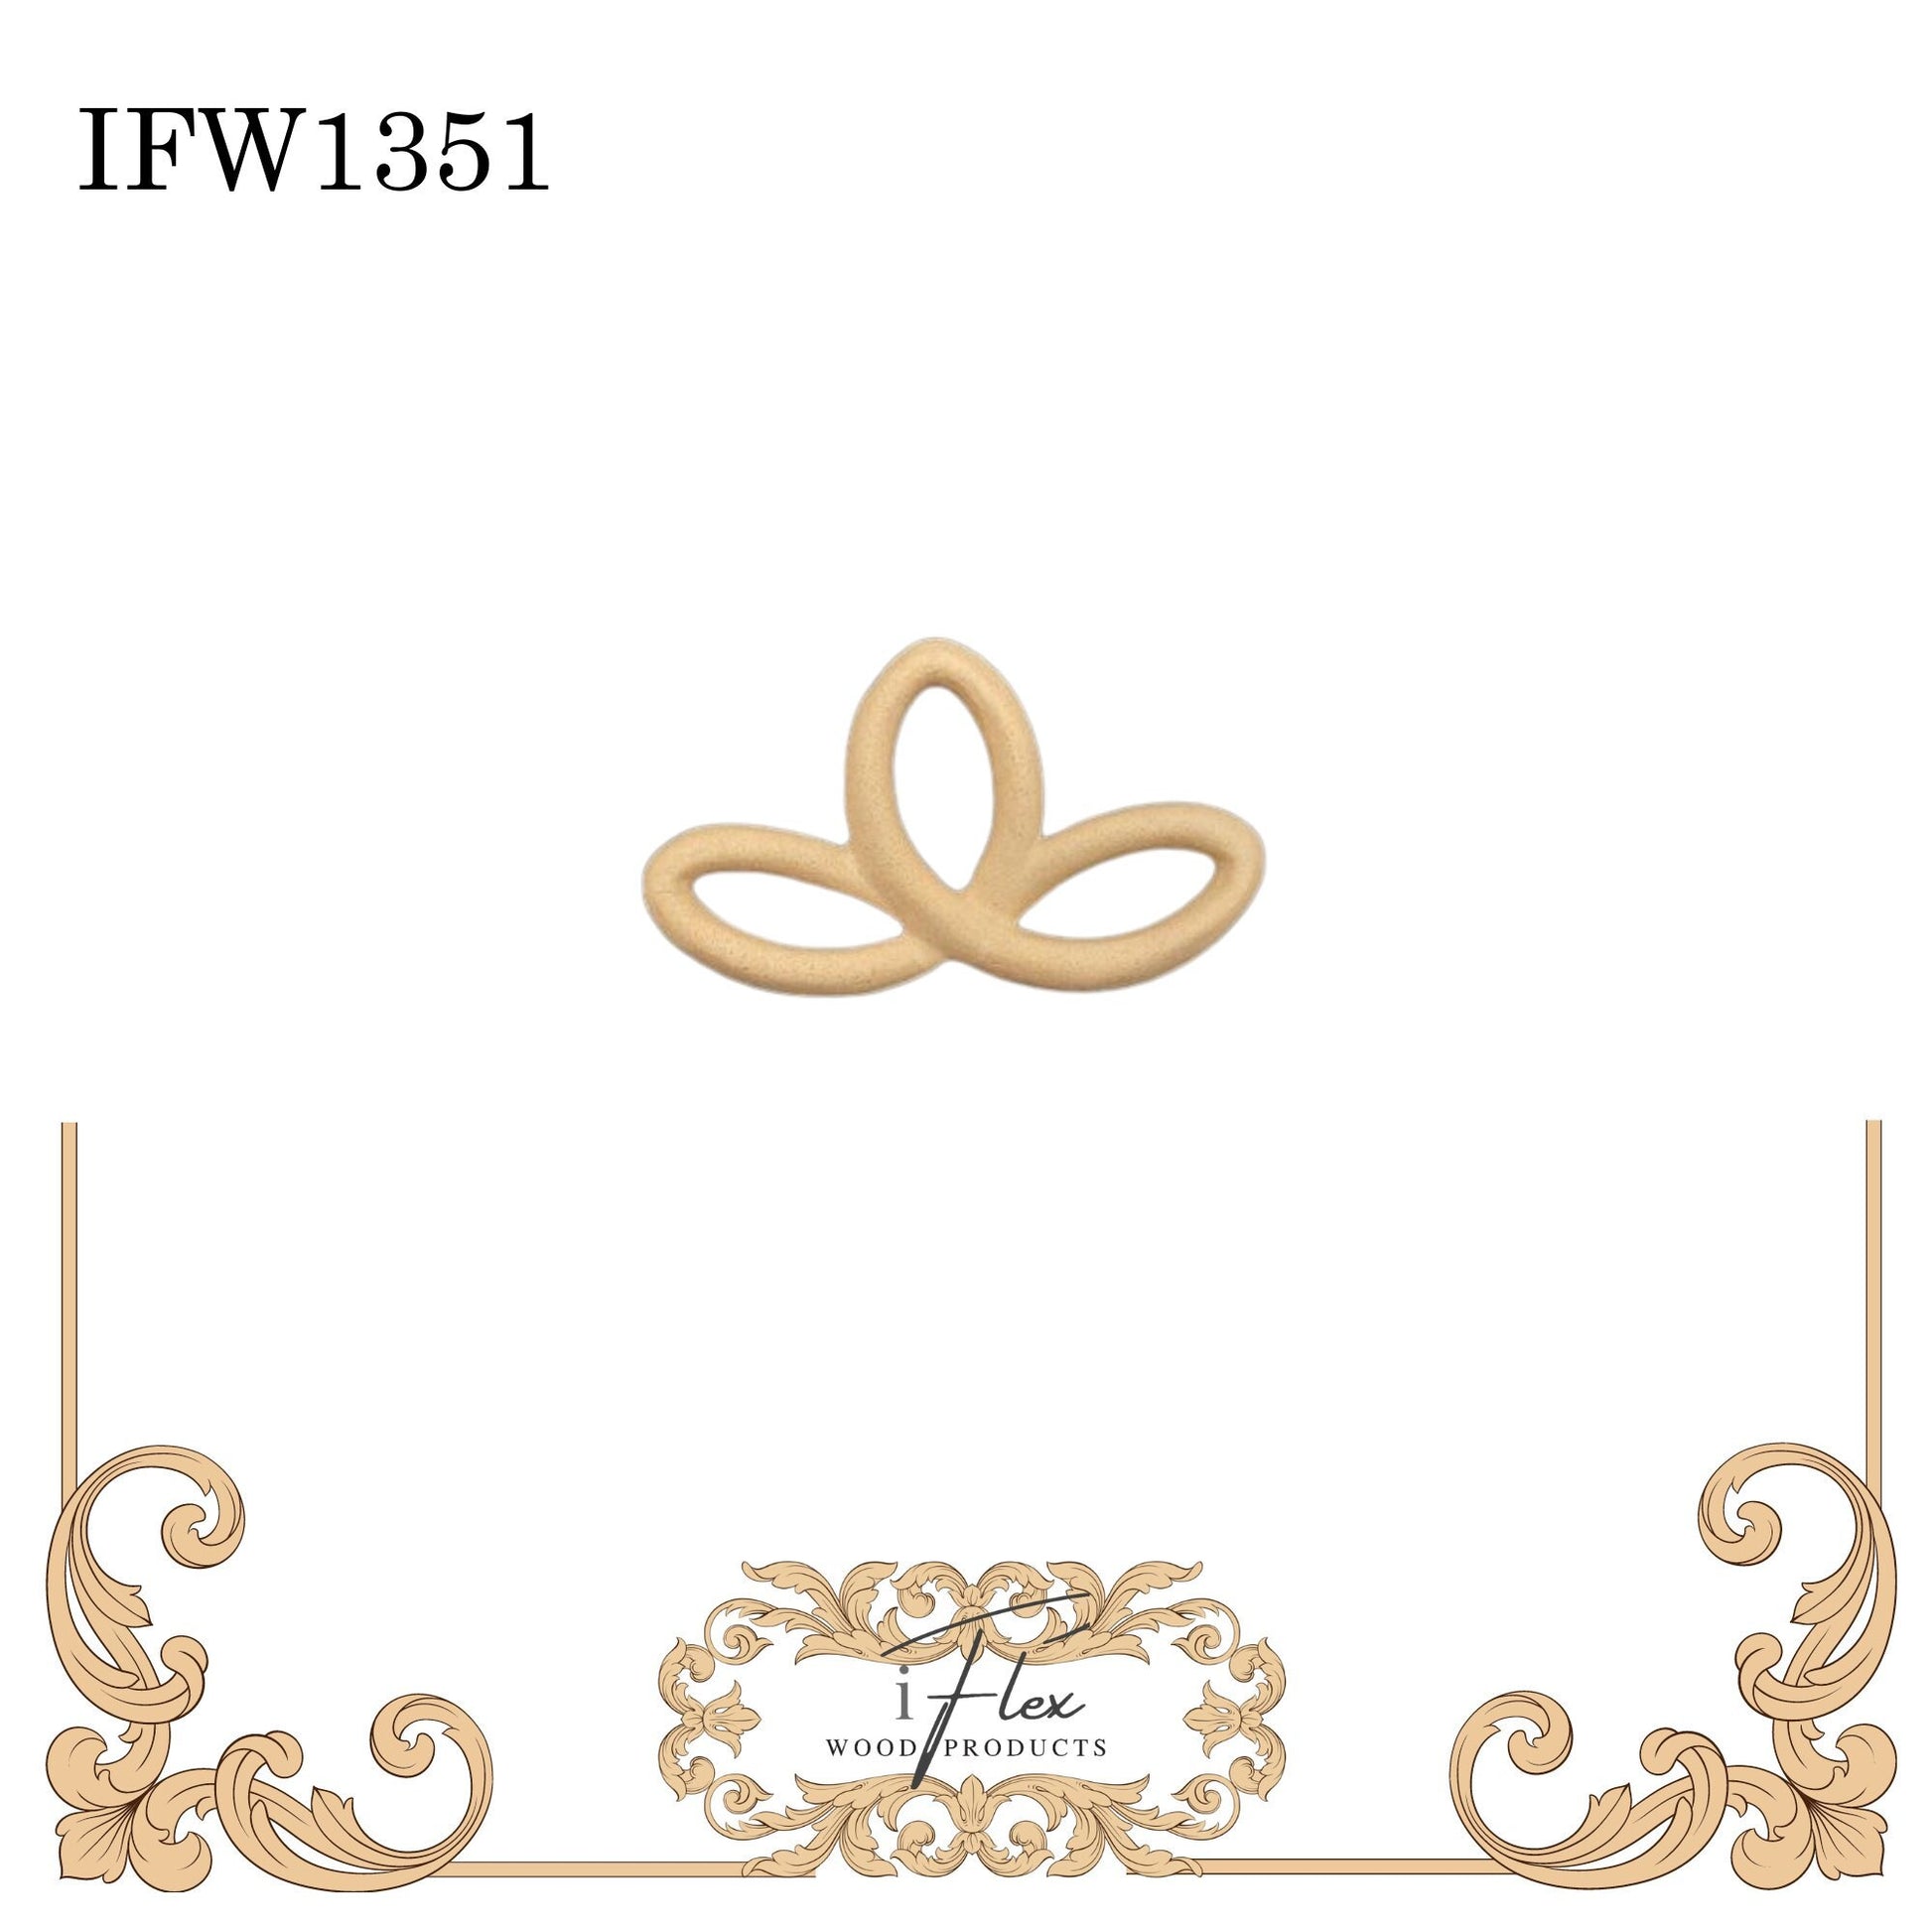 IFW 1351 iFlex Wood Products, bendable mouldings, flexible, wooden appliques, flower, centerpiece